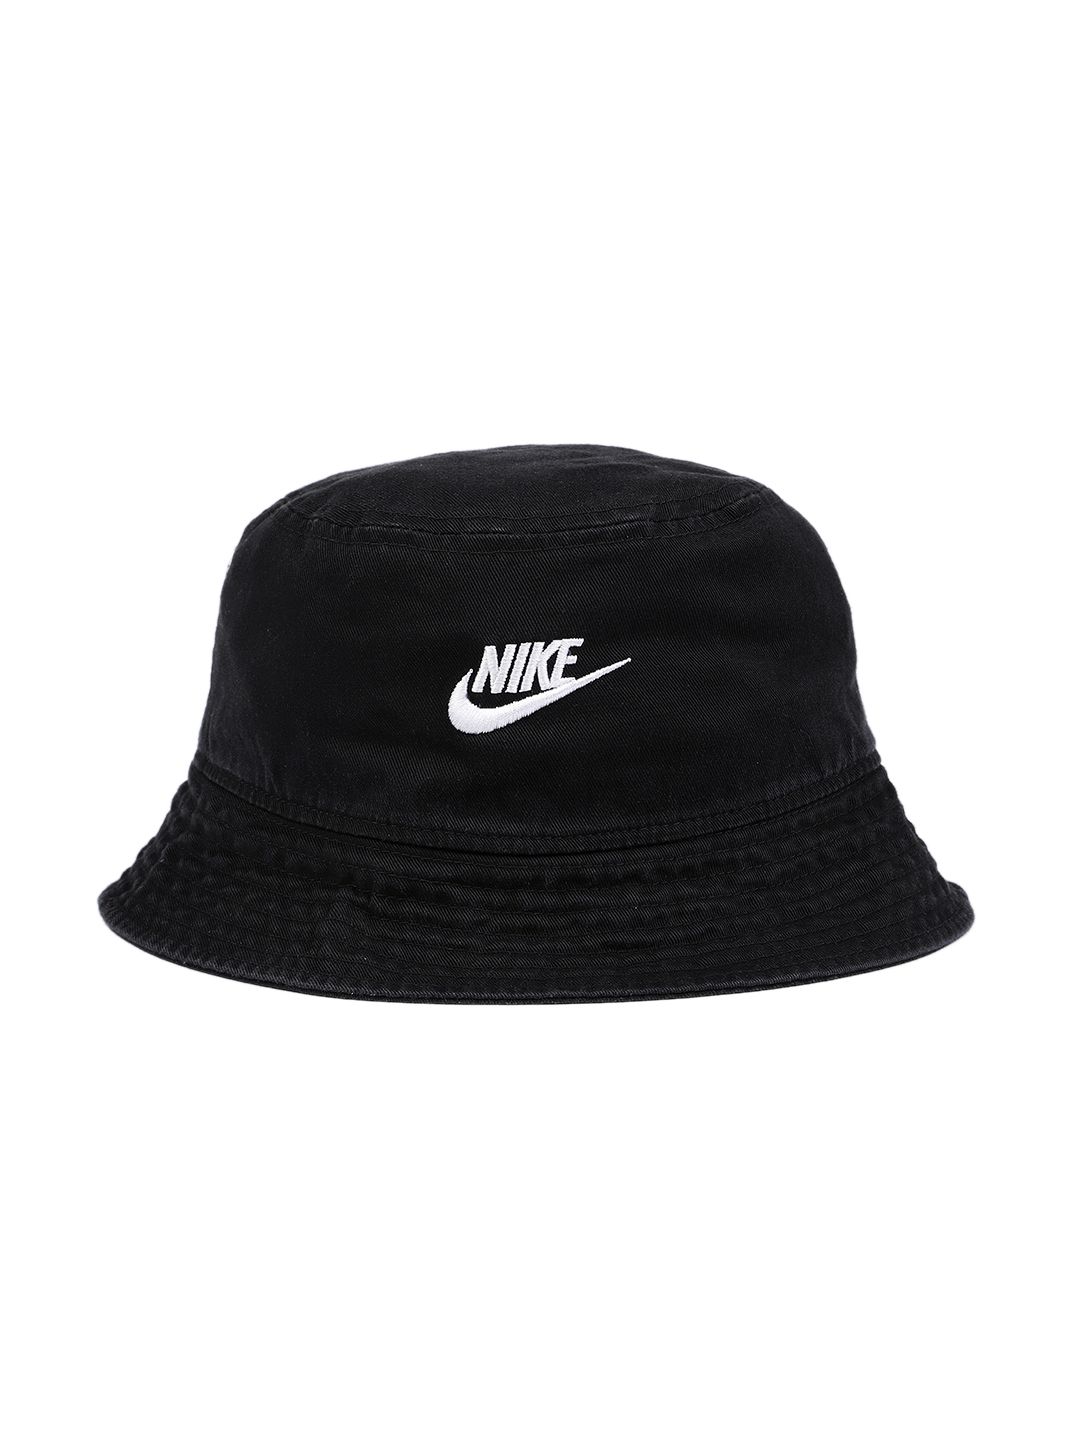 Nike Unisex Black Brand Logo Embroidered Cotton Bucket Hat Price in India